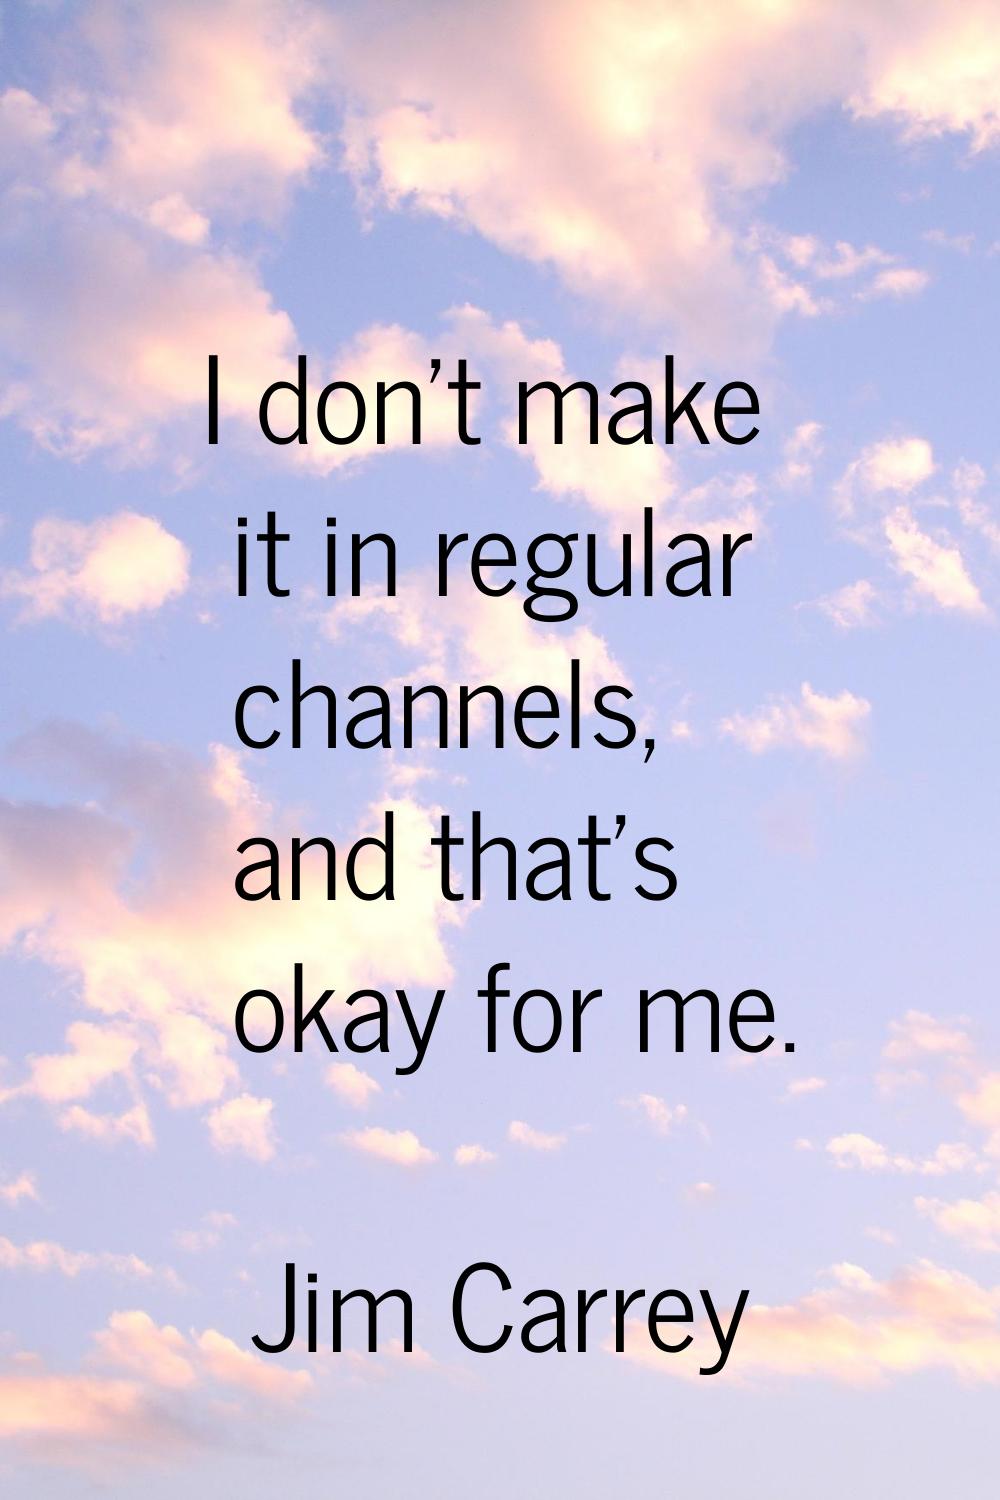 I don't make it in regular channels, and that's okay for me.